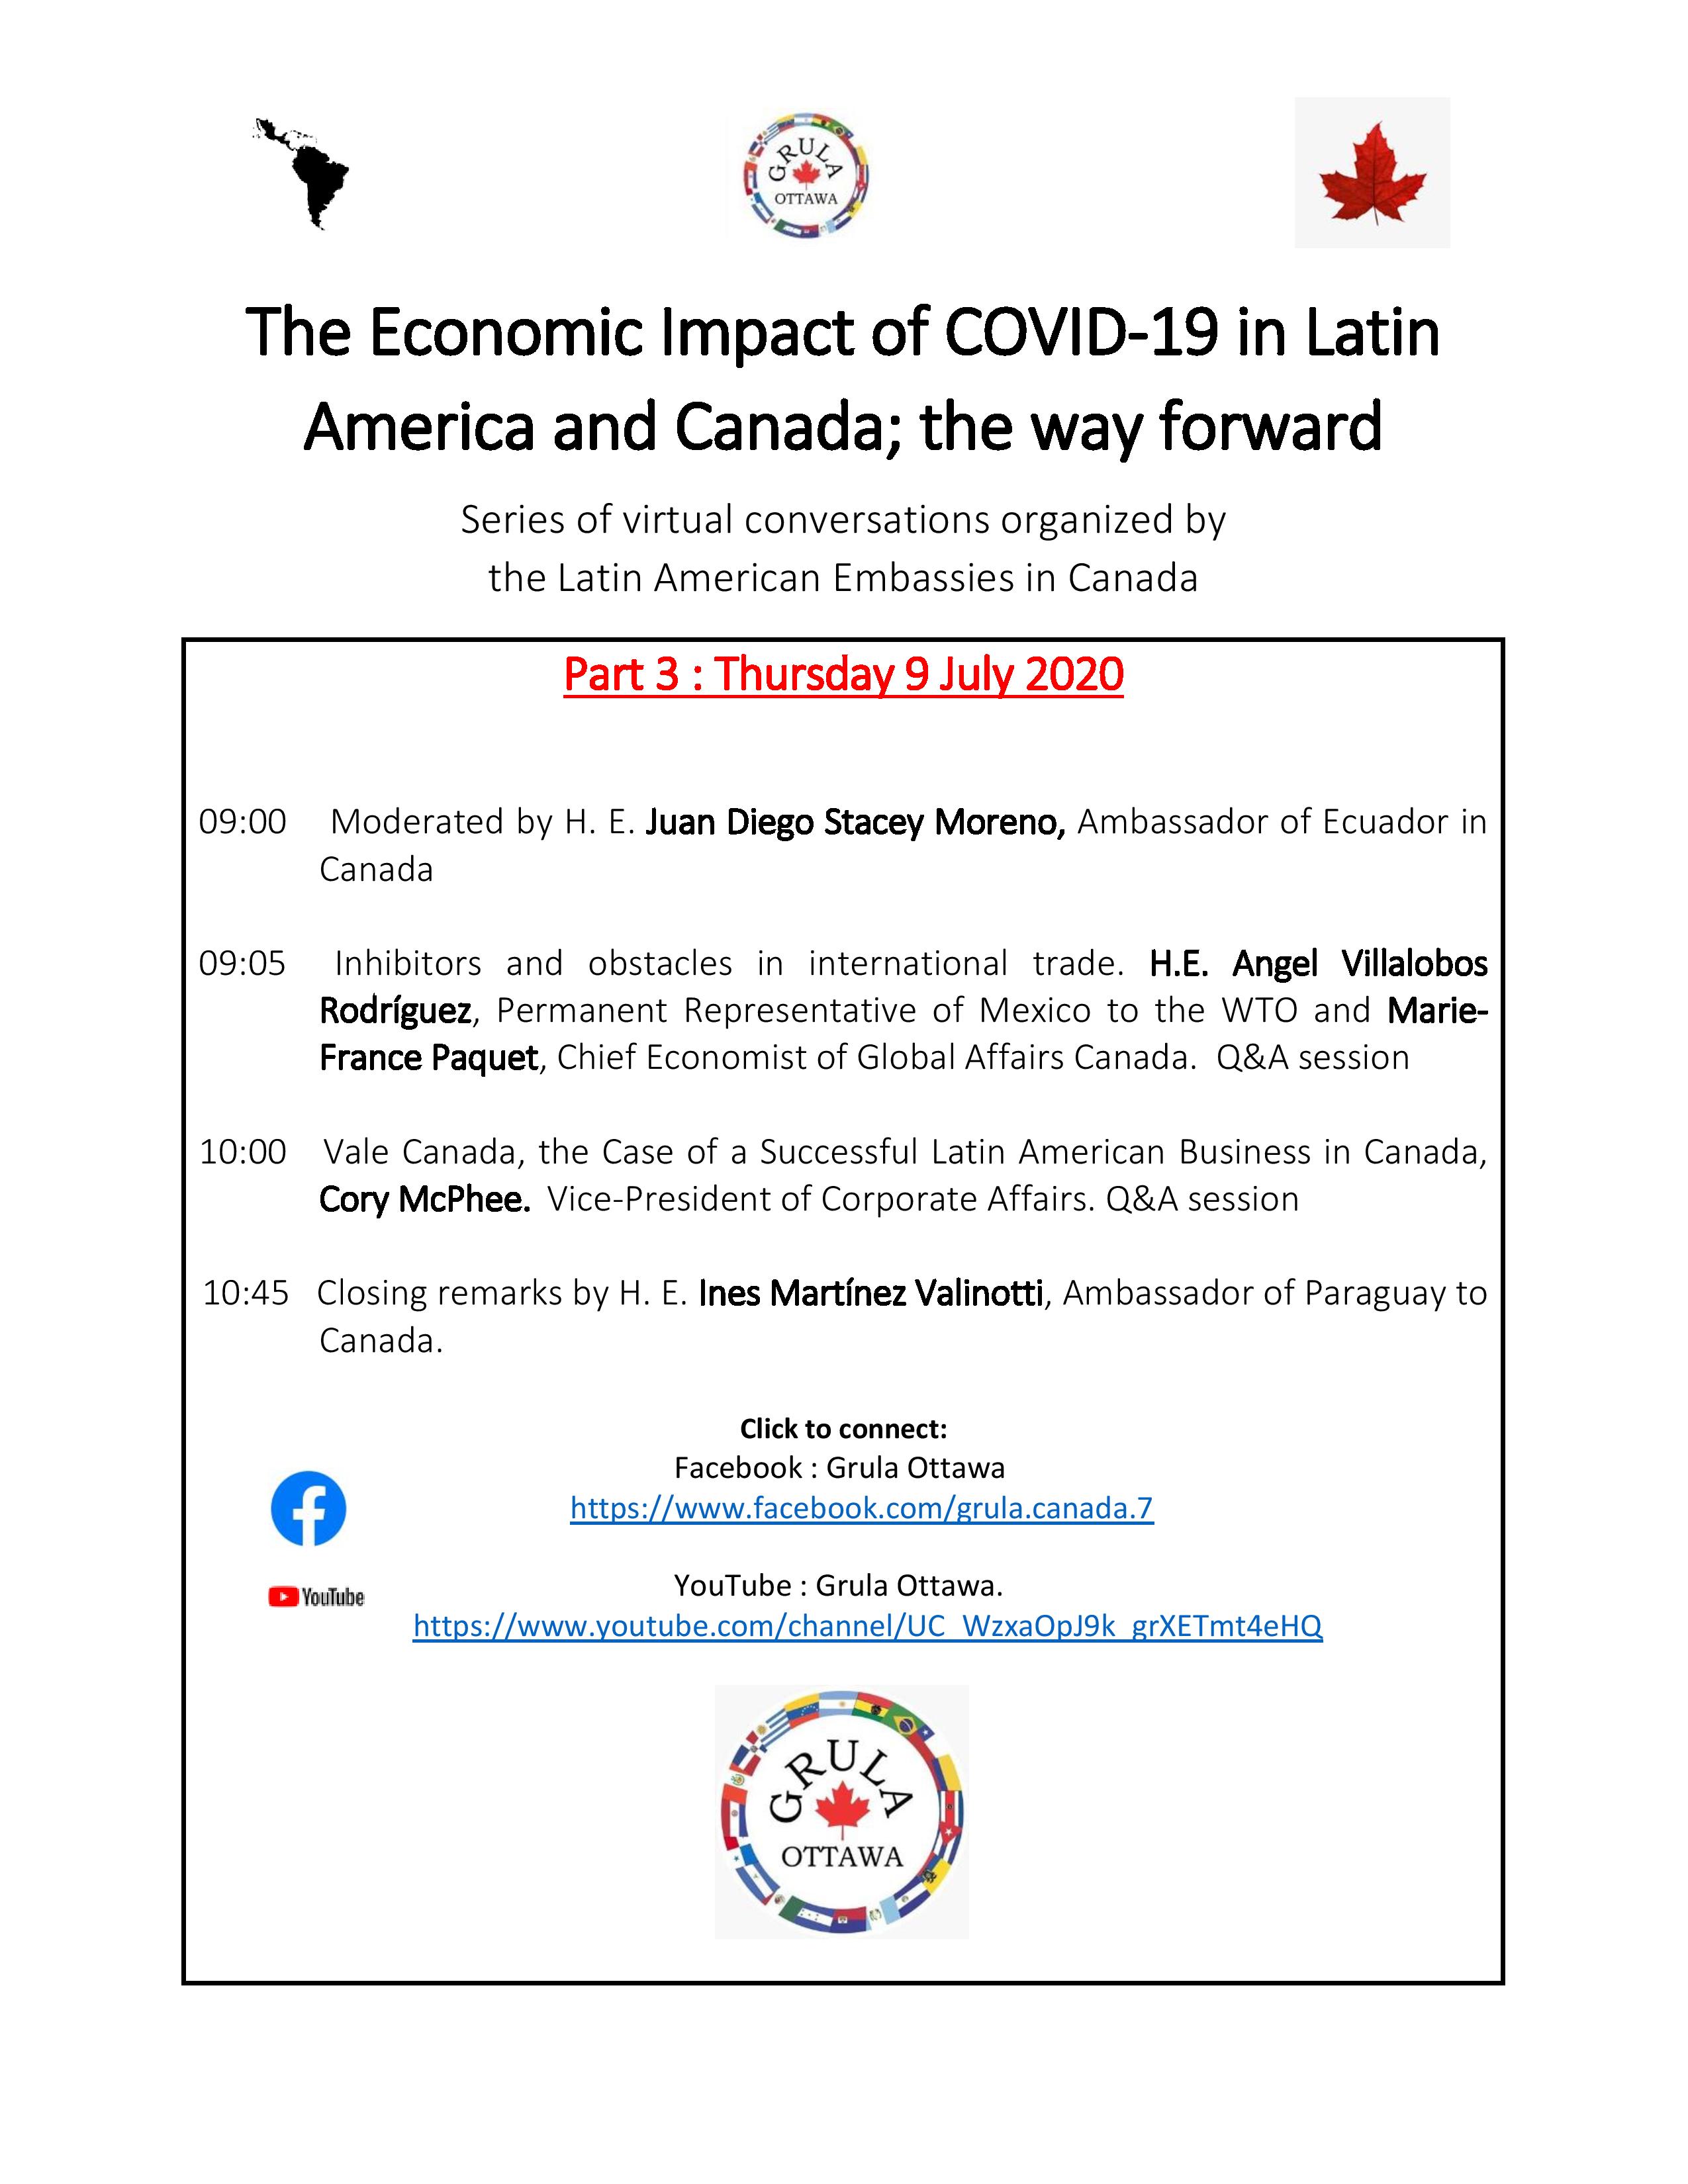 The_Economic_Impact_of_COVID_Session_3-page-001.jpg